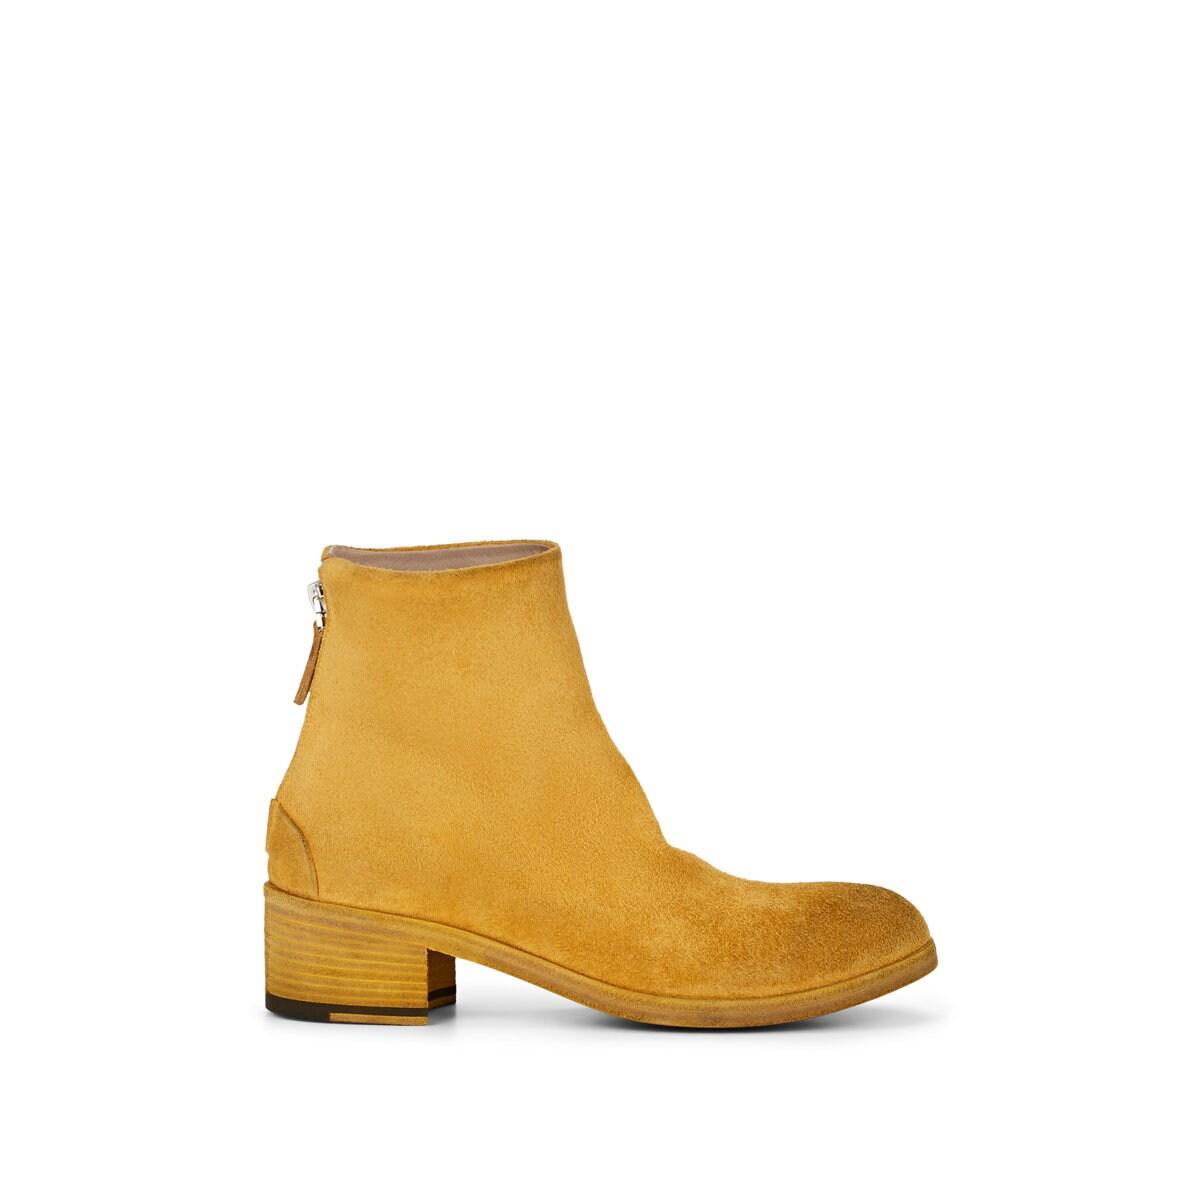 Marsèll Distressed Suede Ankle Boots in Yellow - Lyst